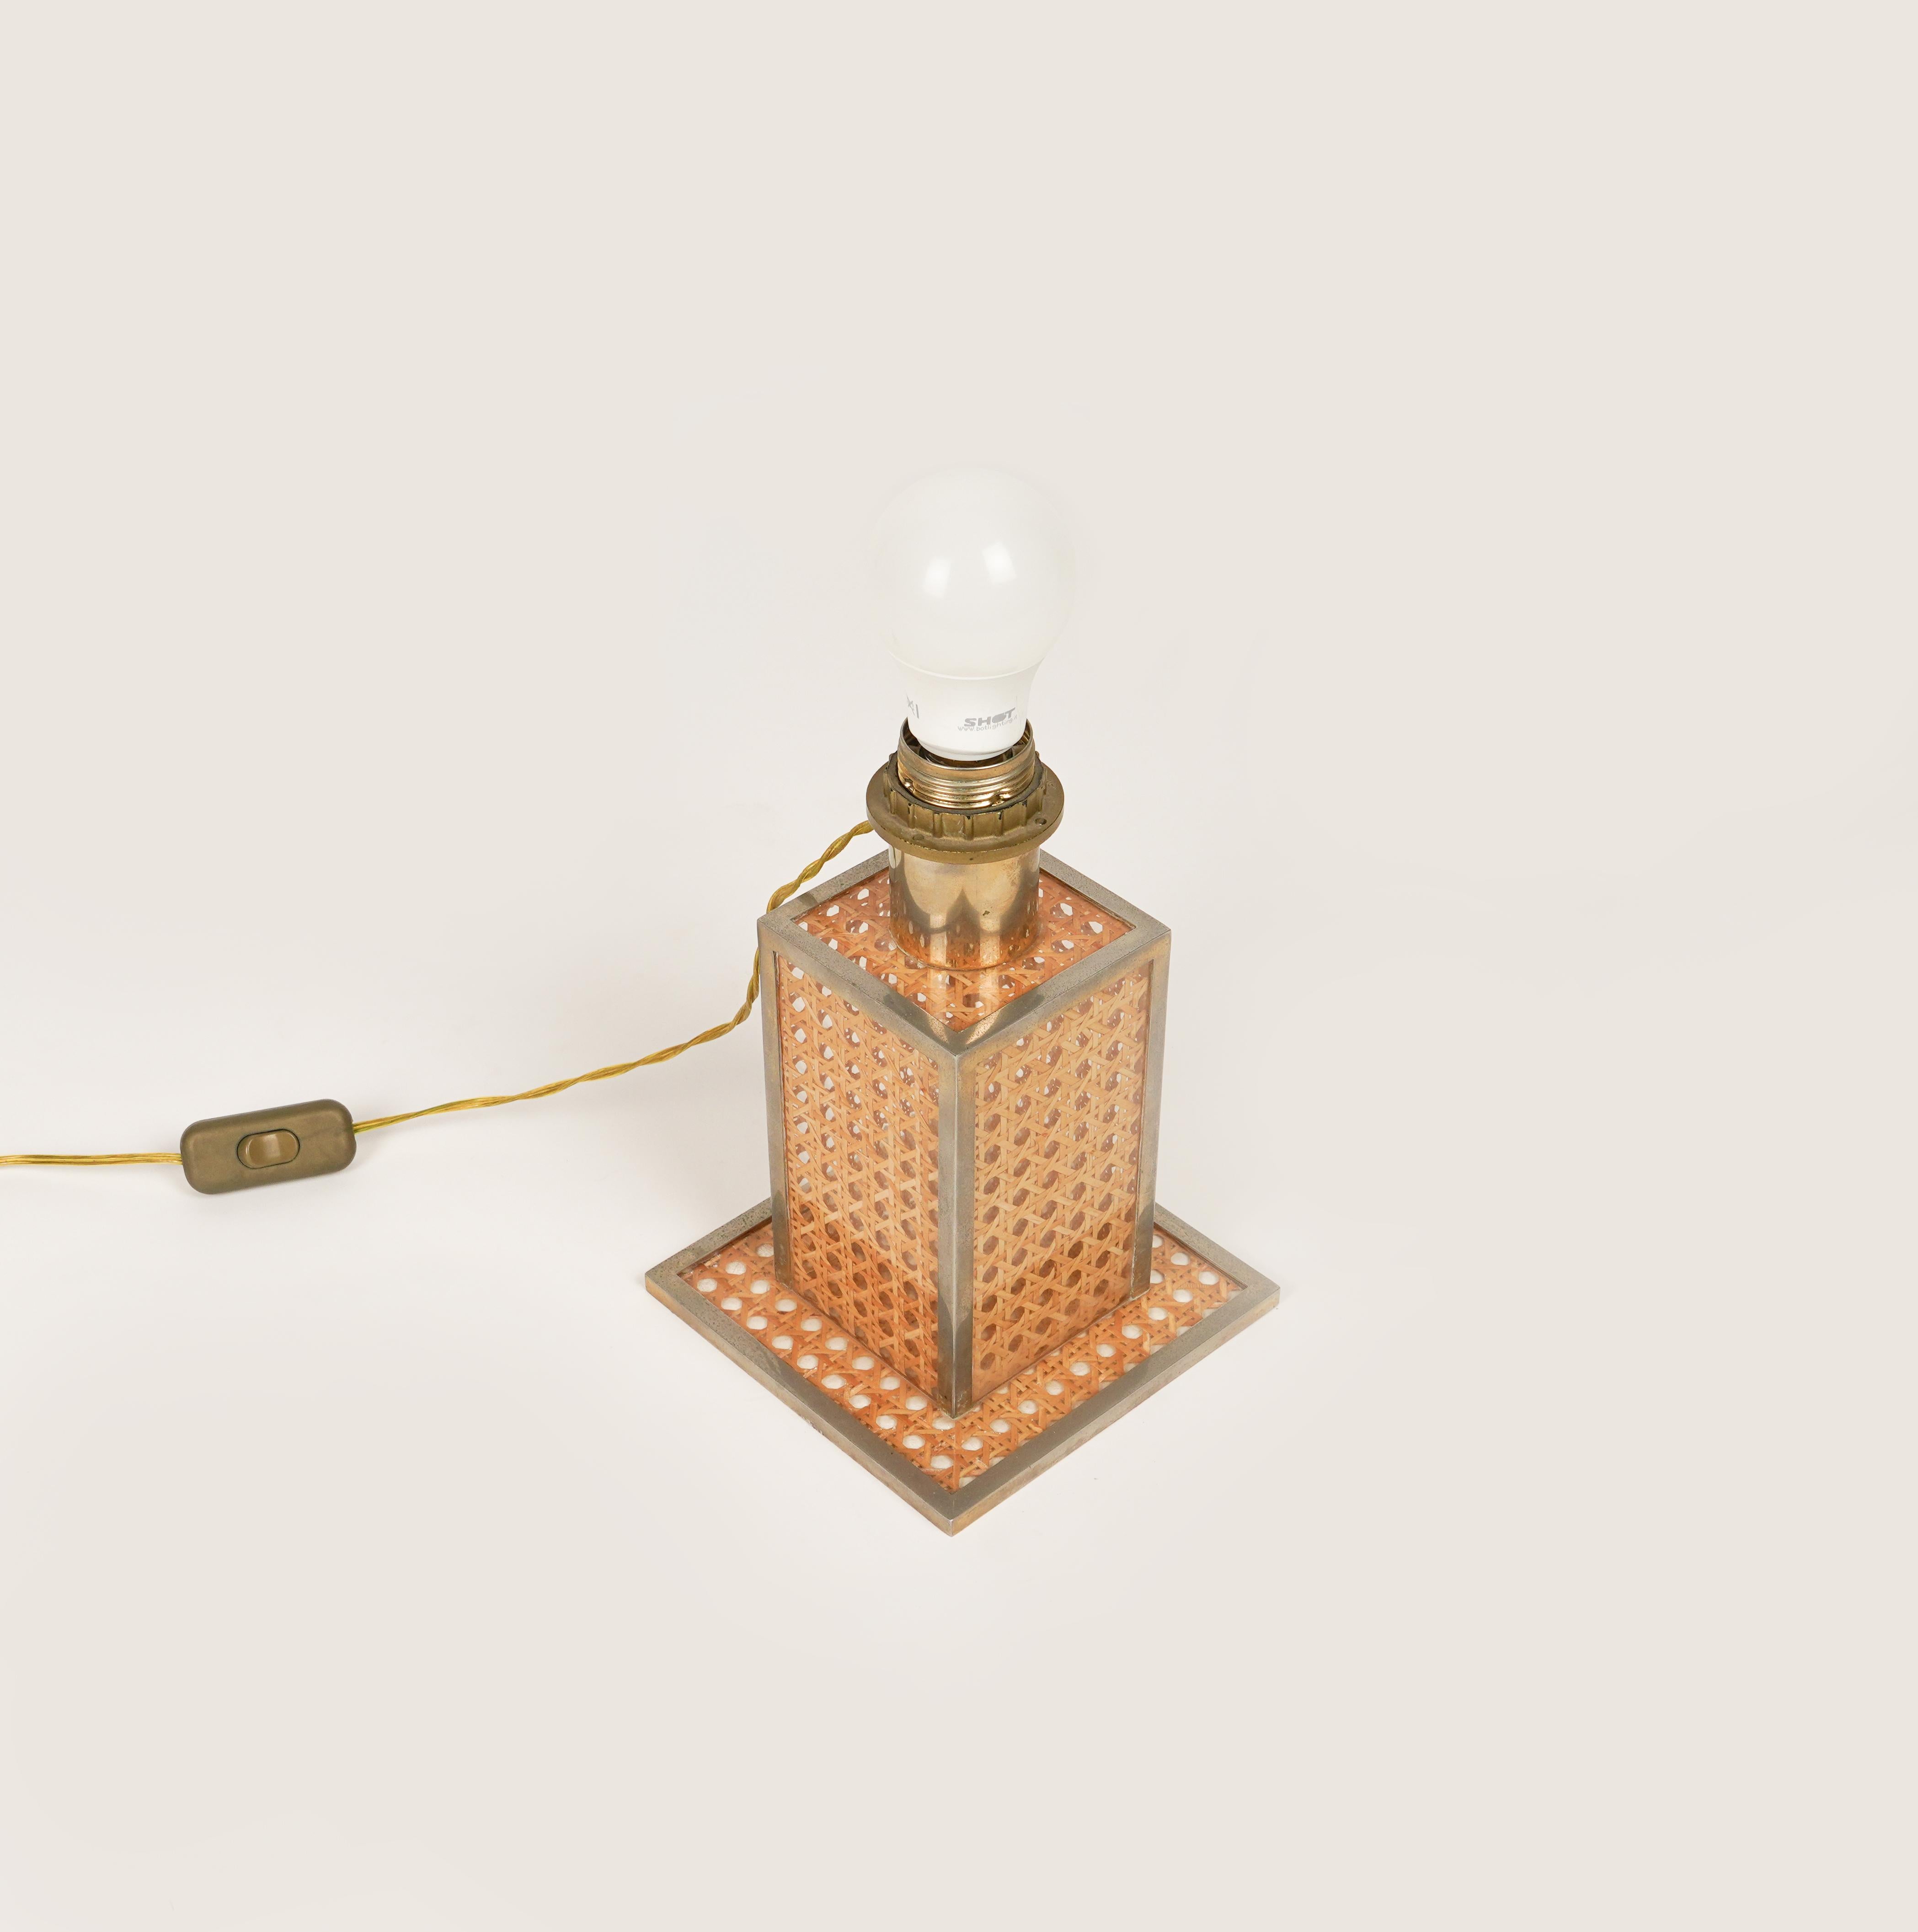 Table Lamp in Lucite, Rattan and Brass Christian Dior Style, Italy 1970s For Sale 3